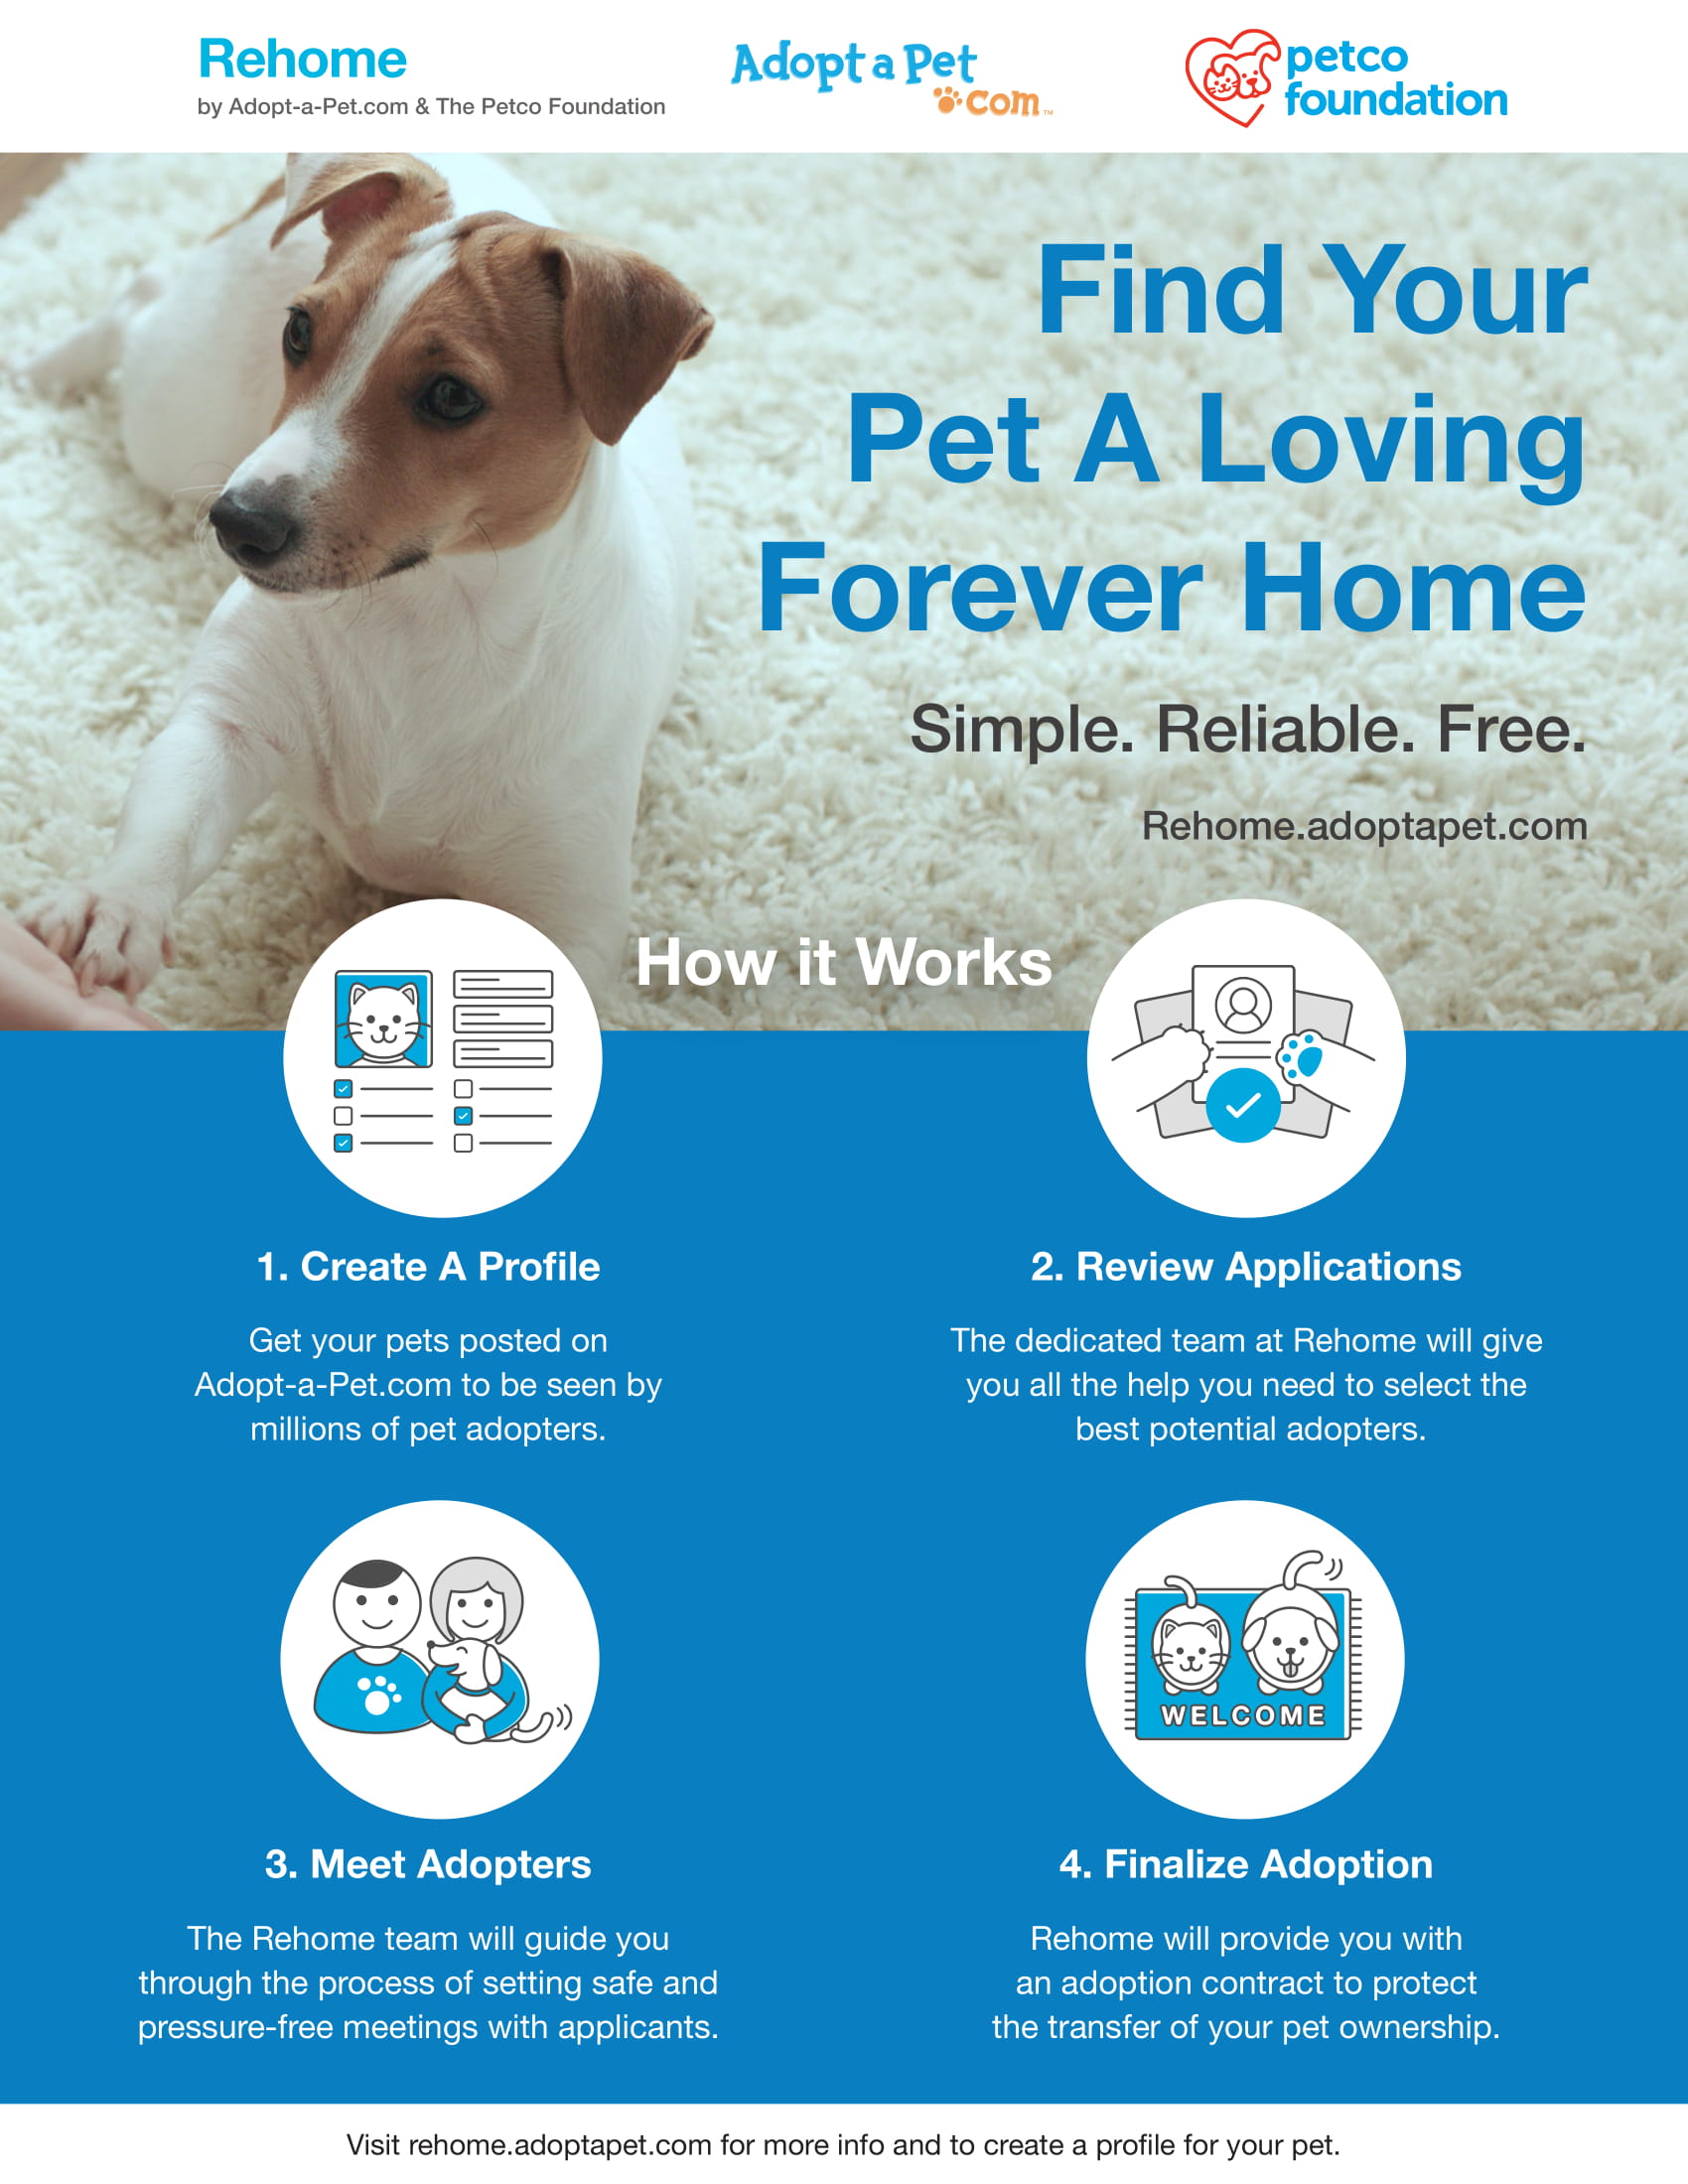 Rehome Downloadable Flier 1